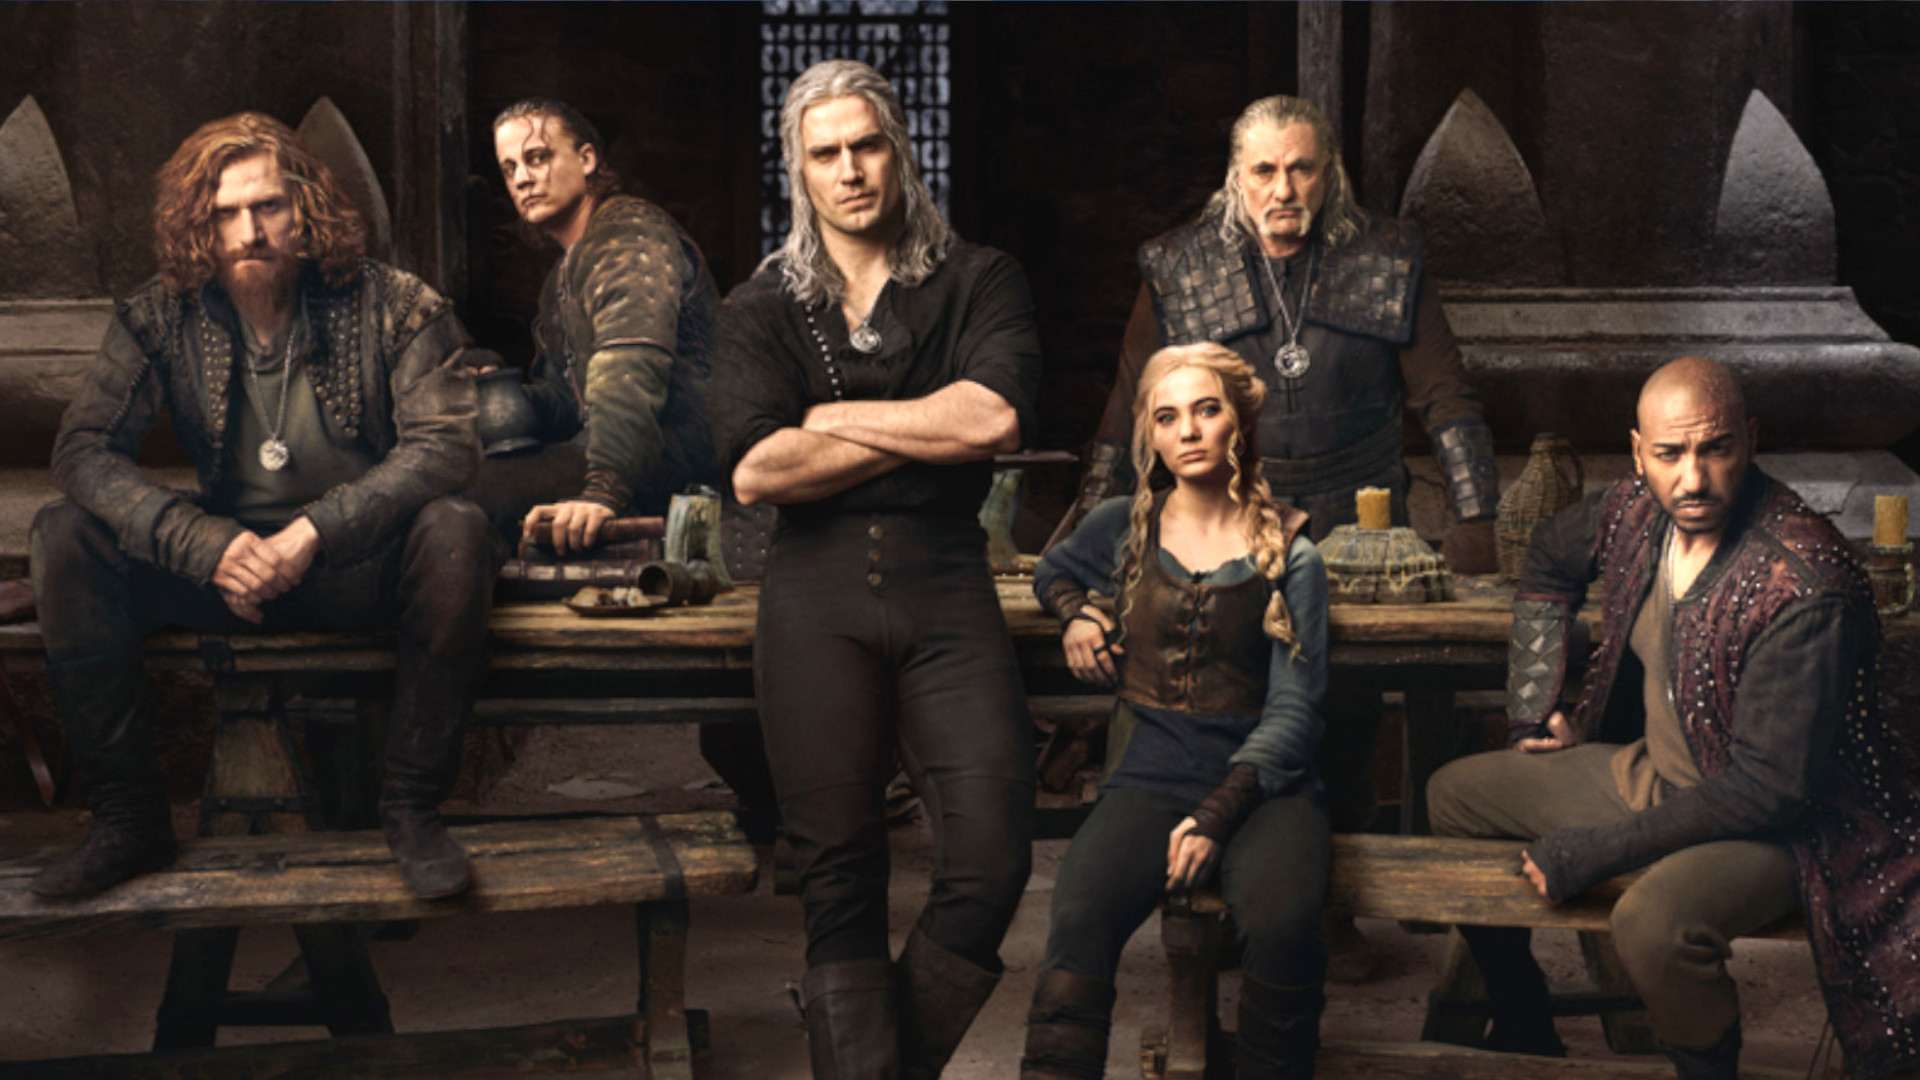 The Witcher Season 3 Cast, Characters & Actors